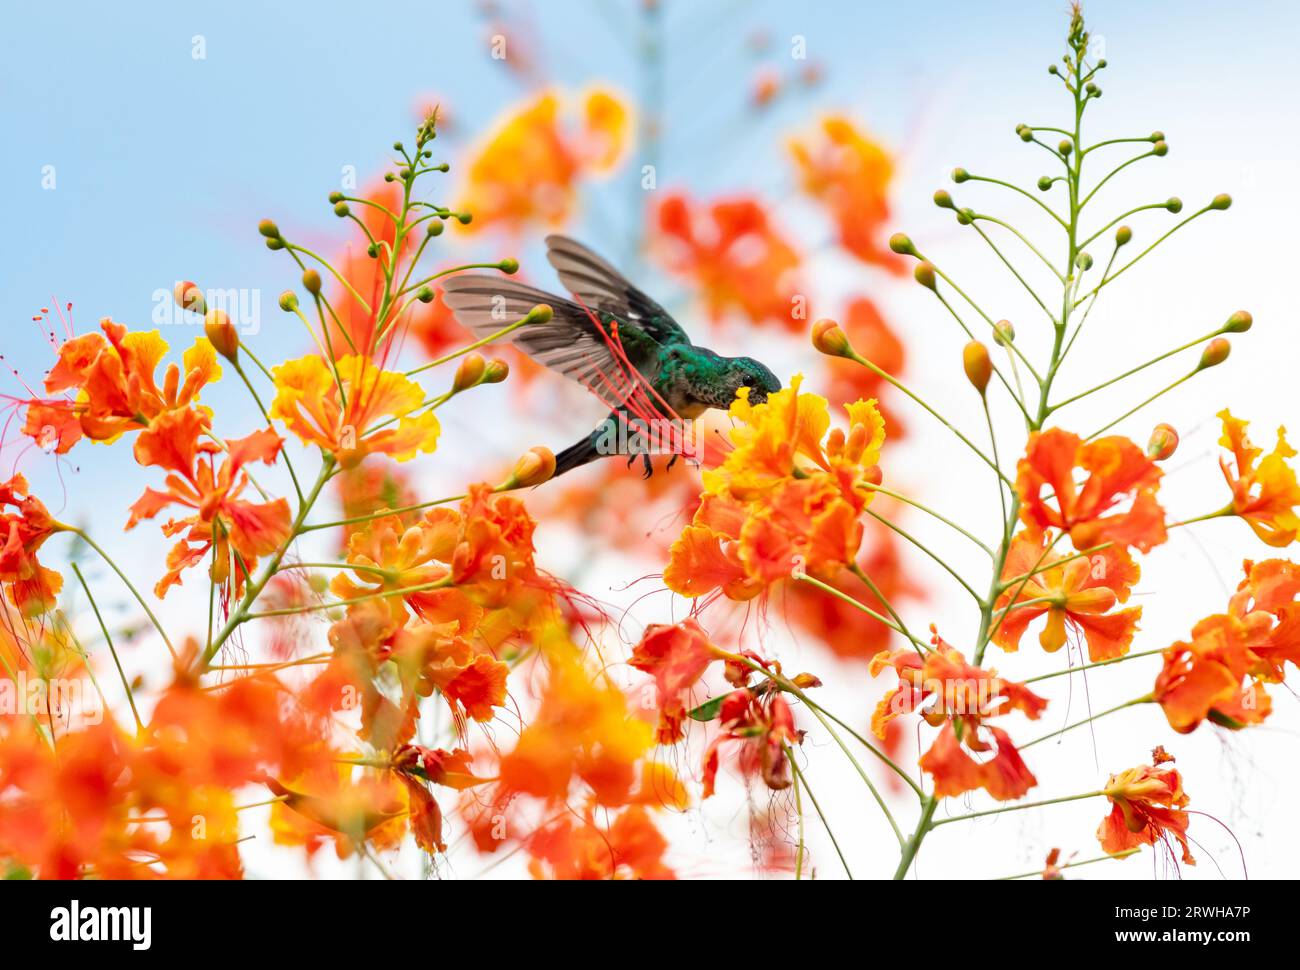 Blue-chinned Sapphire hummingbird, Chlorestes notata, flying in the midst of vibrant orange flowers feeding on nectar Stock Photo